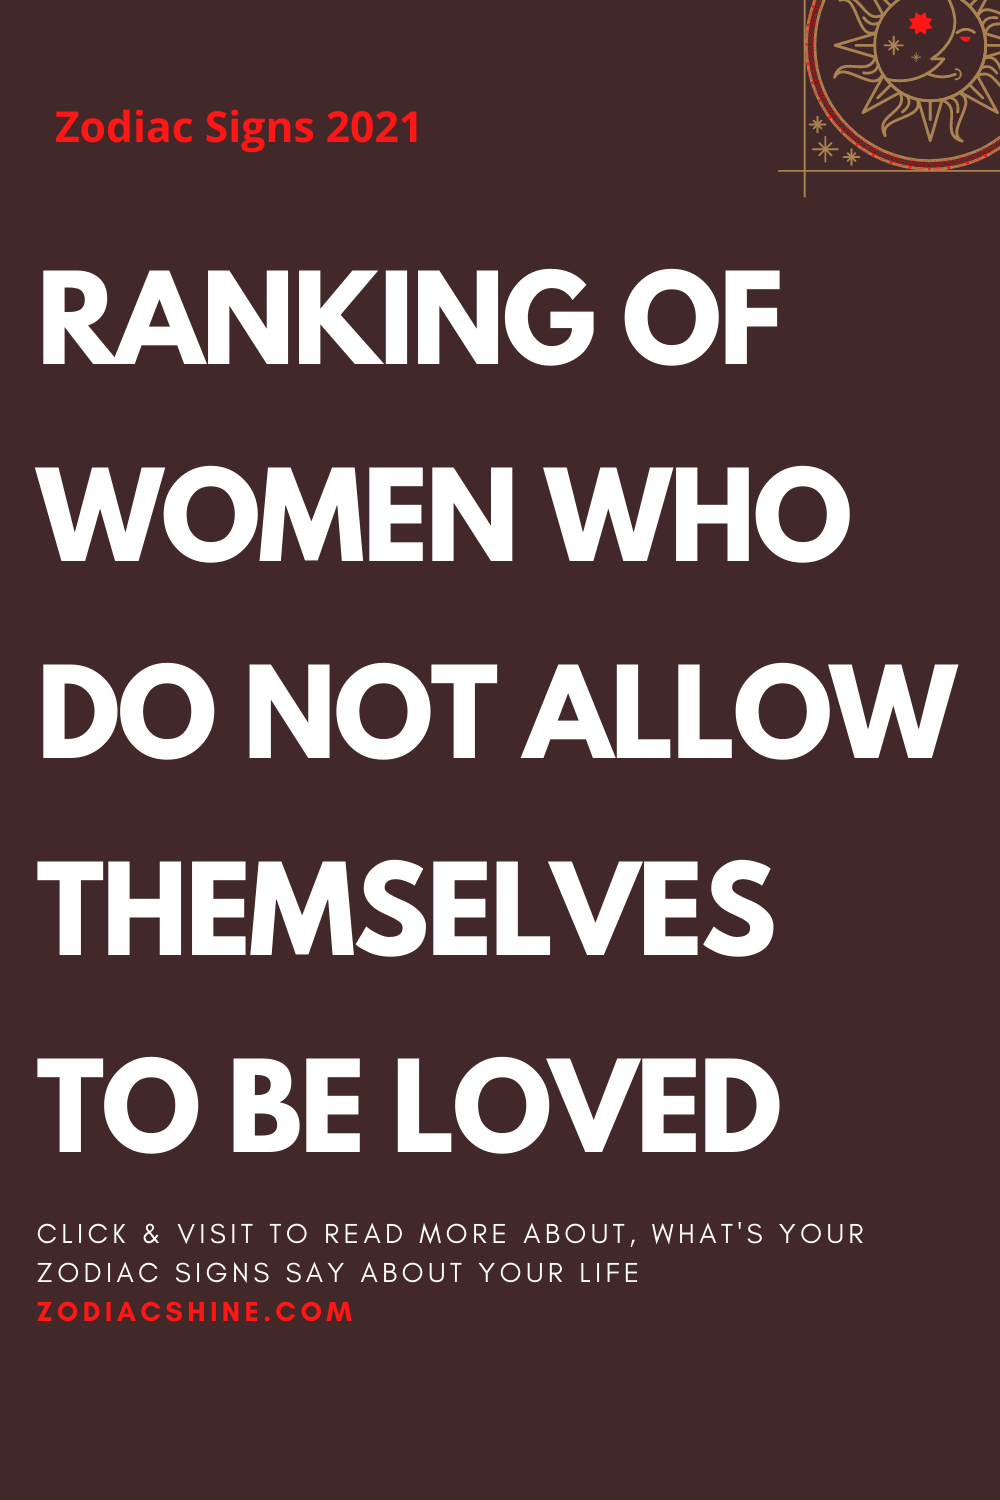 RANKING OF WOMEN WHO DO NOT ALLOW THEMSELVES TO BE LOVED